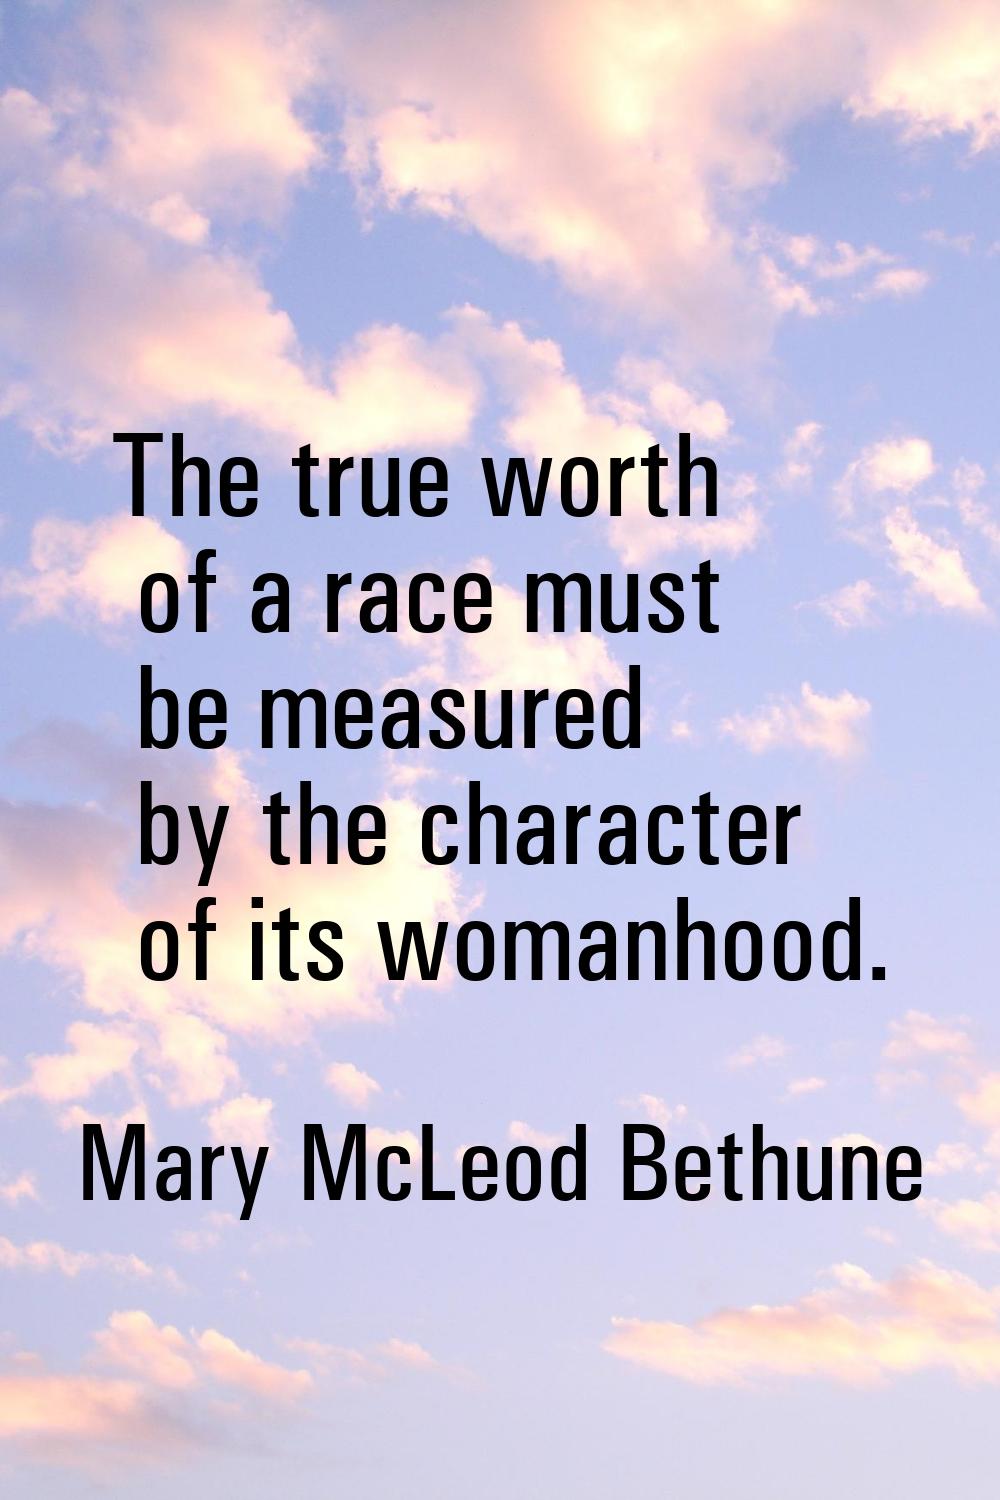 The true worth of a race must be measured by the character of its womanhood.